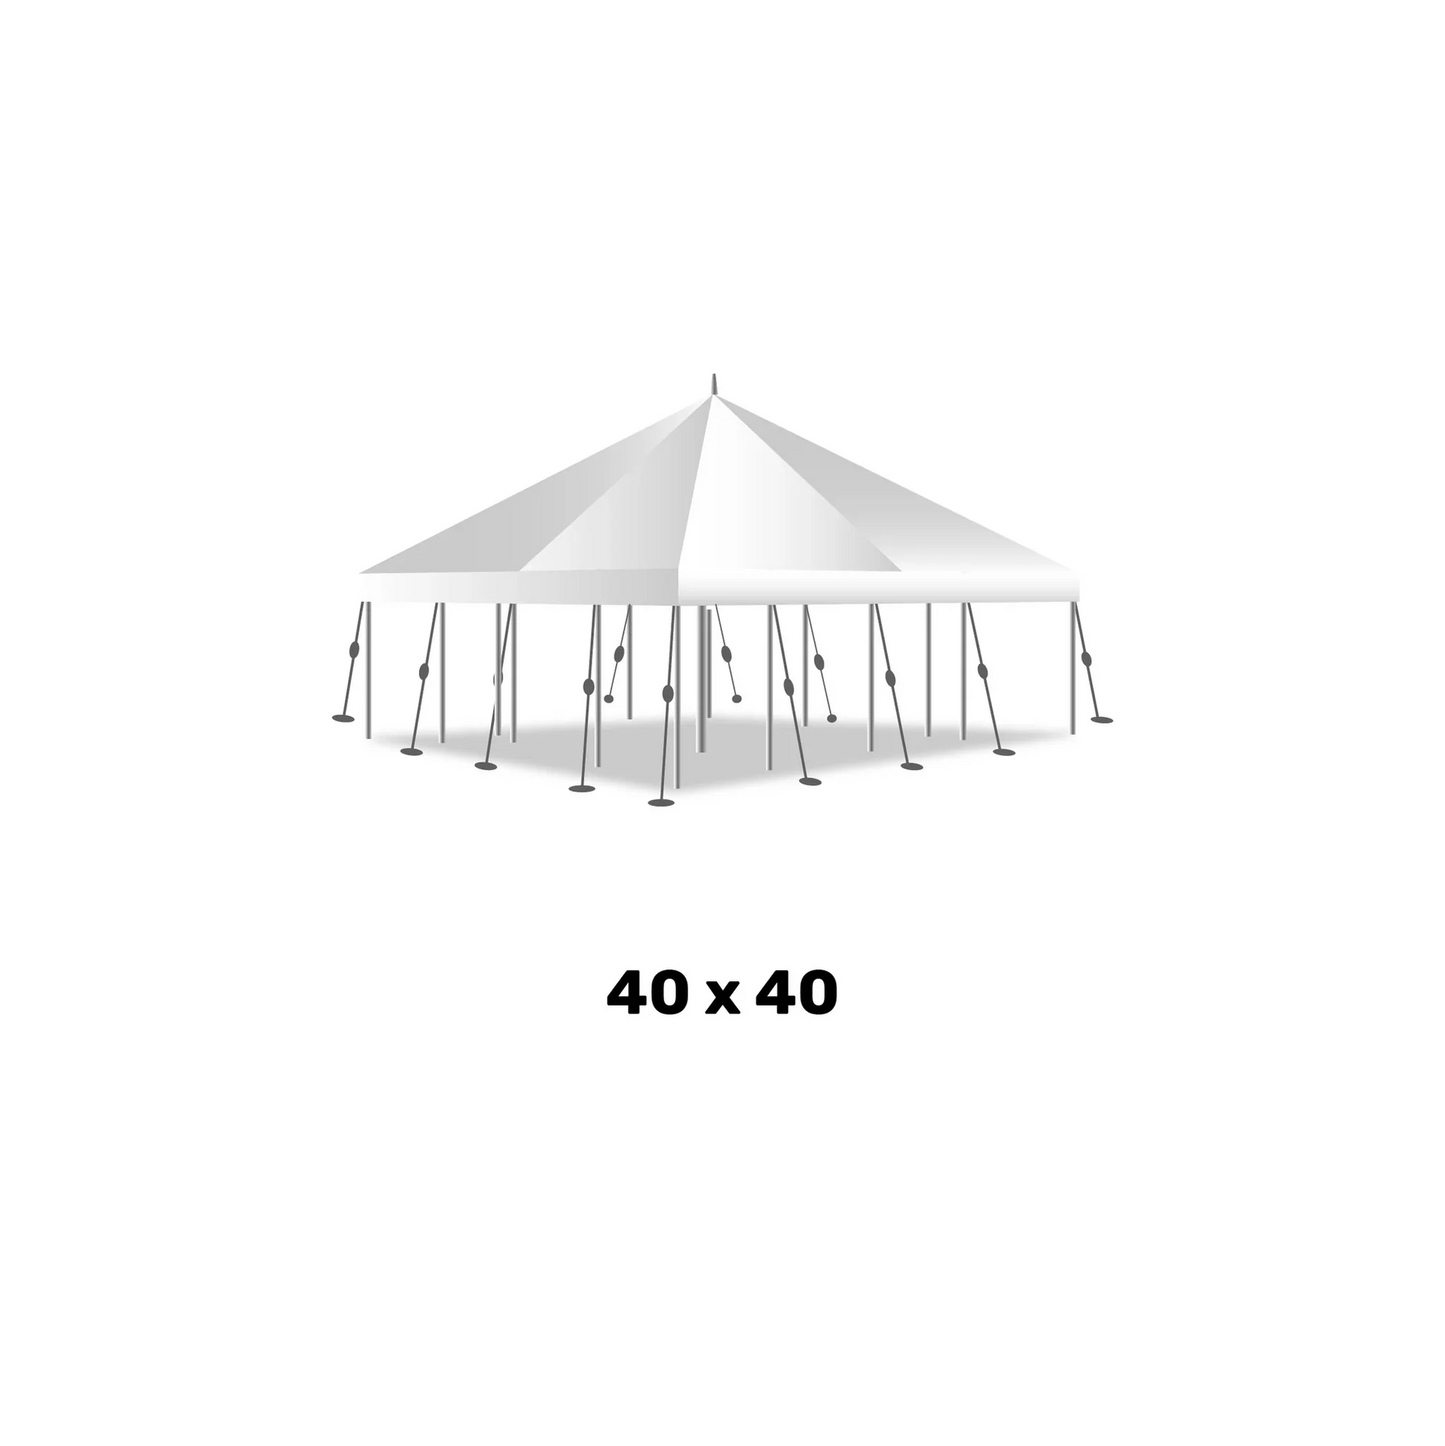 a 40 foot by 40 foot white marquee high peak pole tent